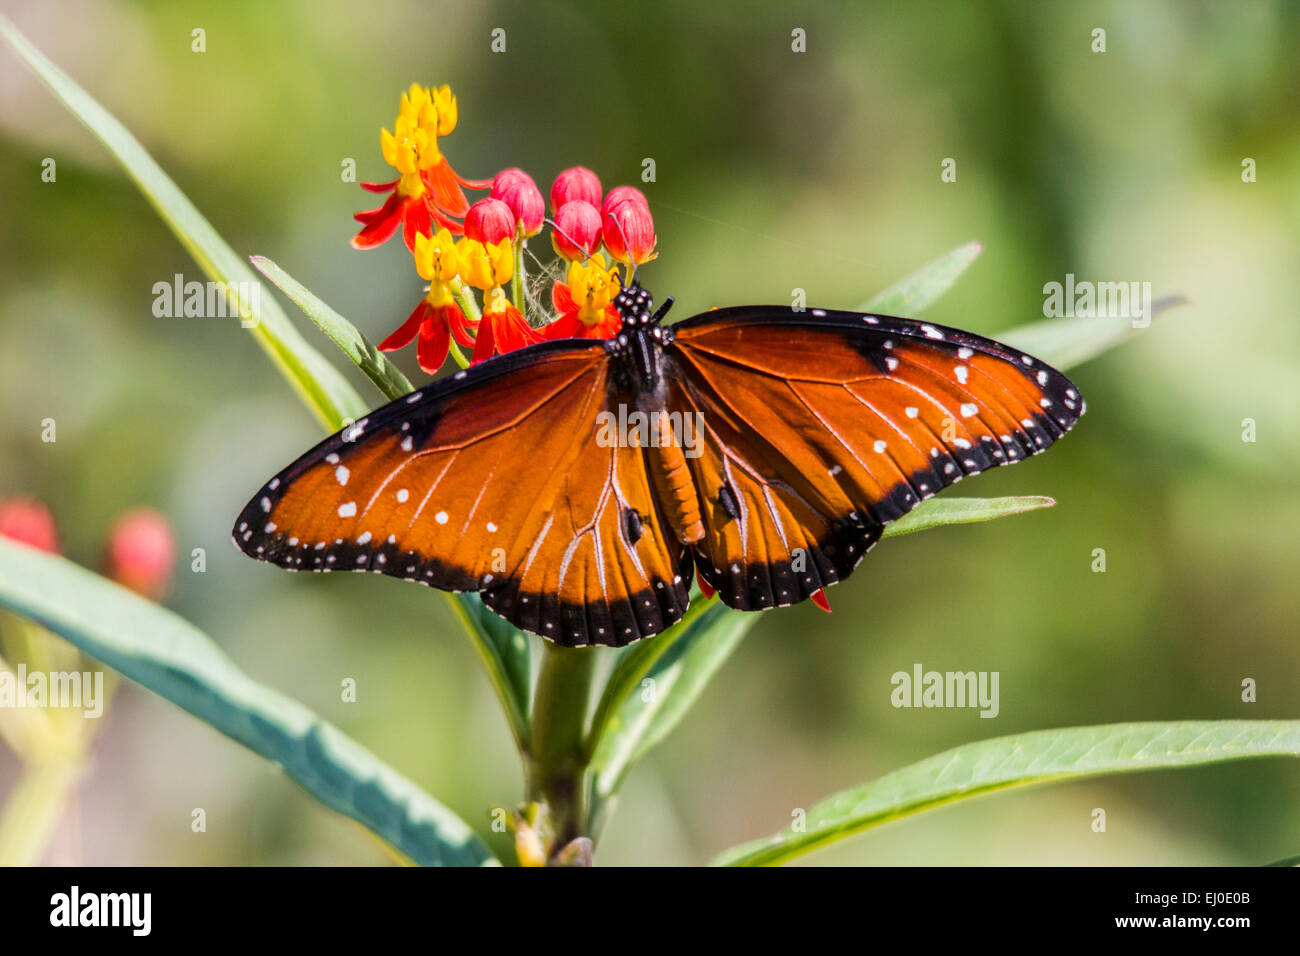 Asclepias curassavica, Blood-flower, Danaus gilippus, Schmetterling, Mexican Butterfly Weed, milkweed, Nymphalidae, Queen Butterf Stock Photo